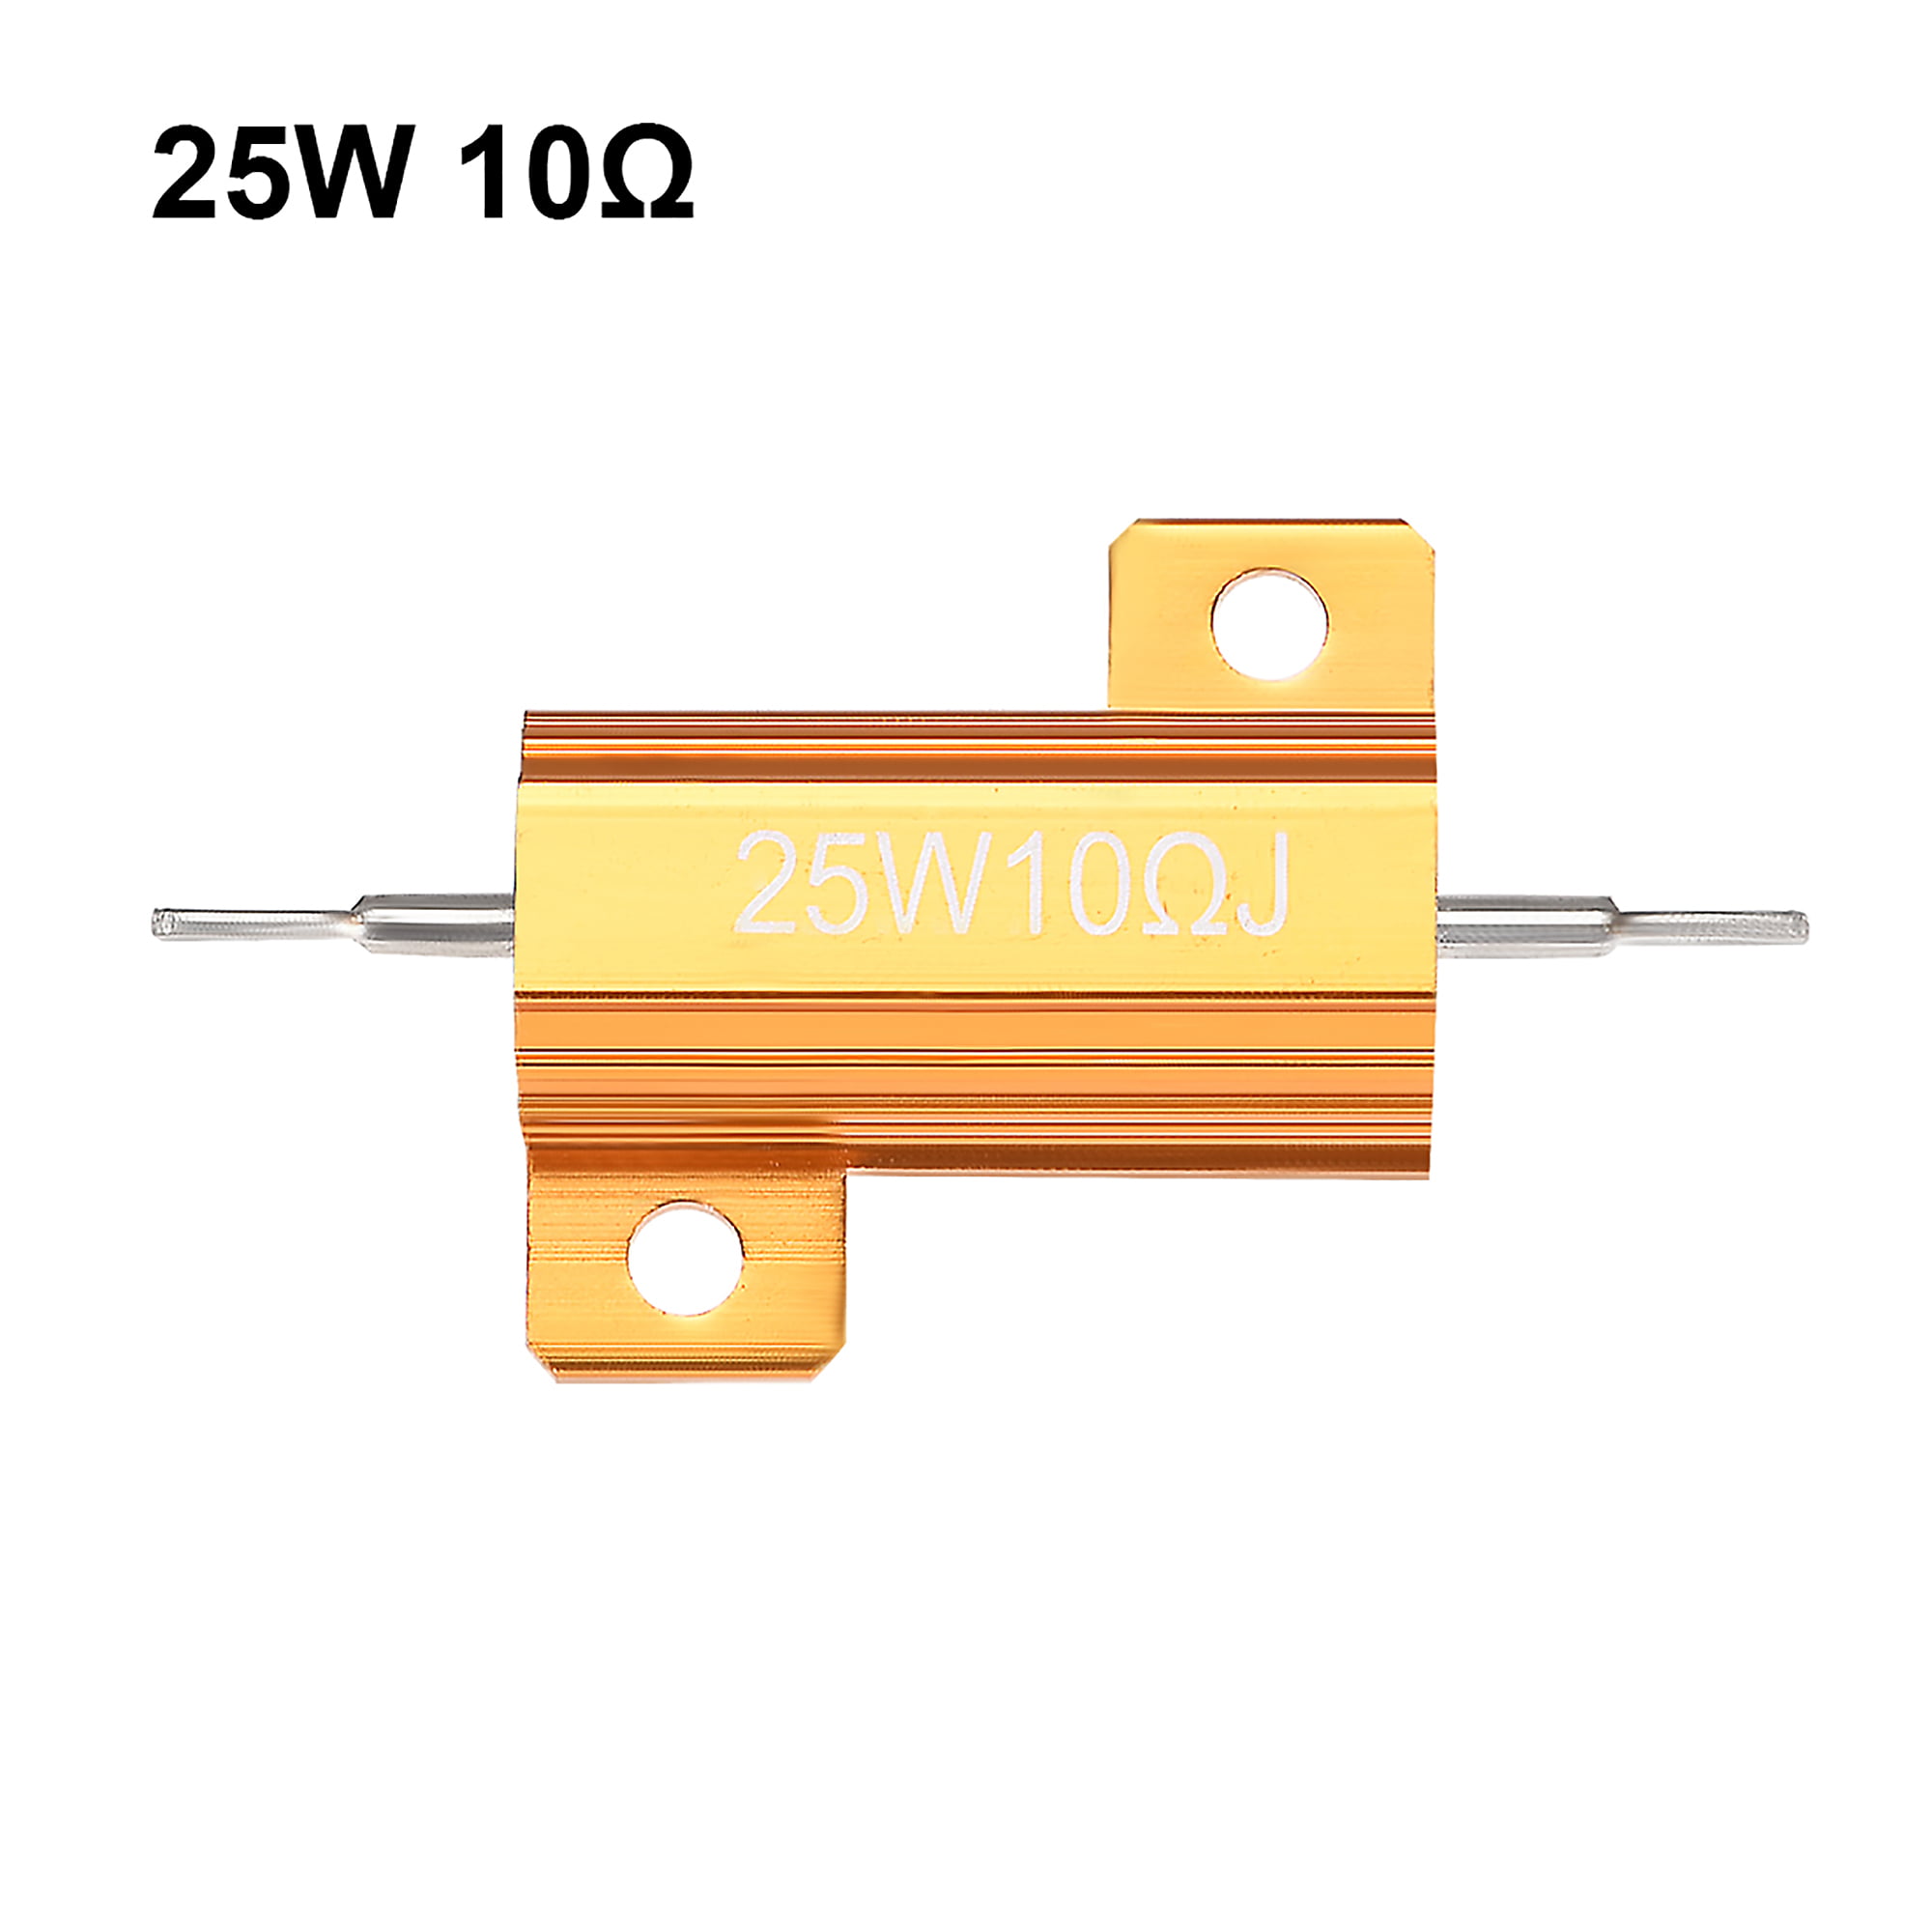 uxcell 25W 250 Ohm 5% Aluminum Housing Resistor Screw Tap Chassis Mounted Aluminum Case Wirewound Resistor Load Resistors Gold Tone 2 pcs